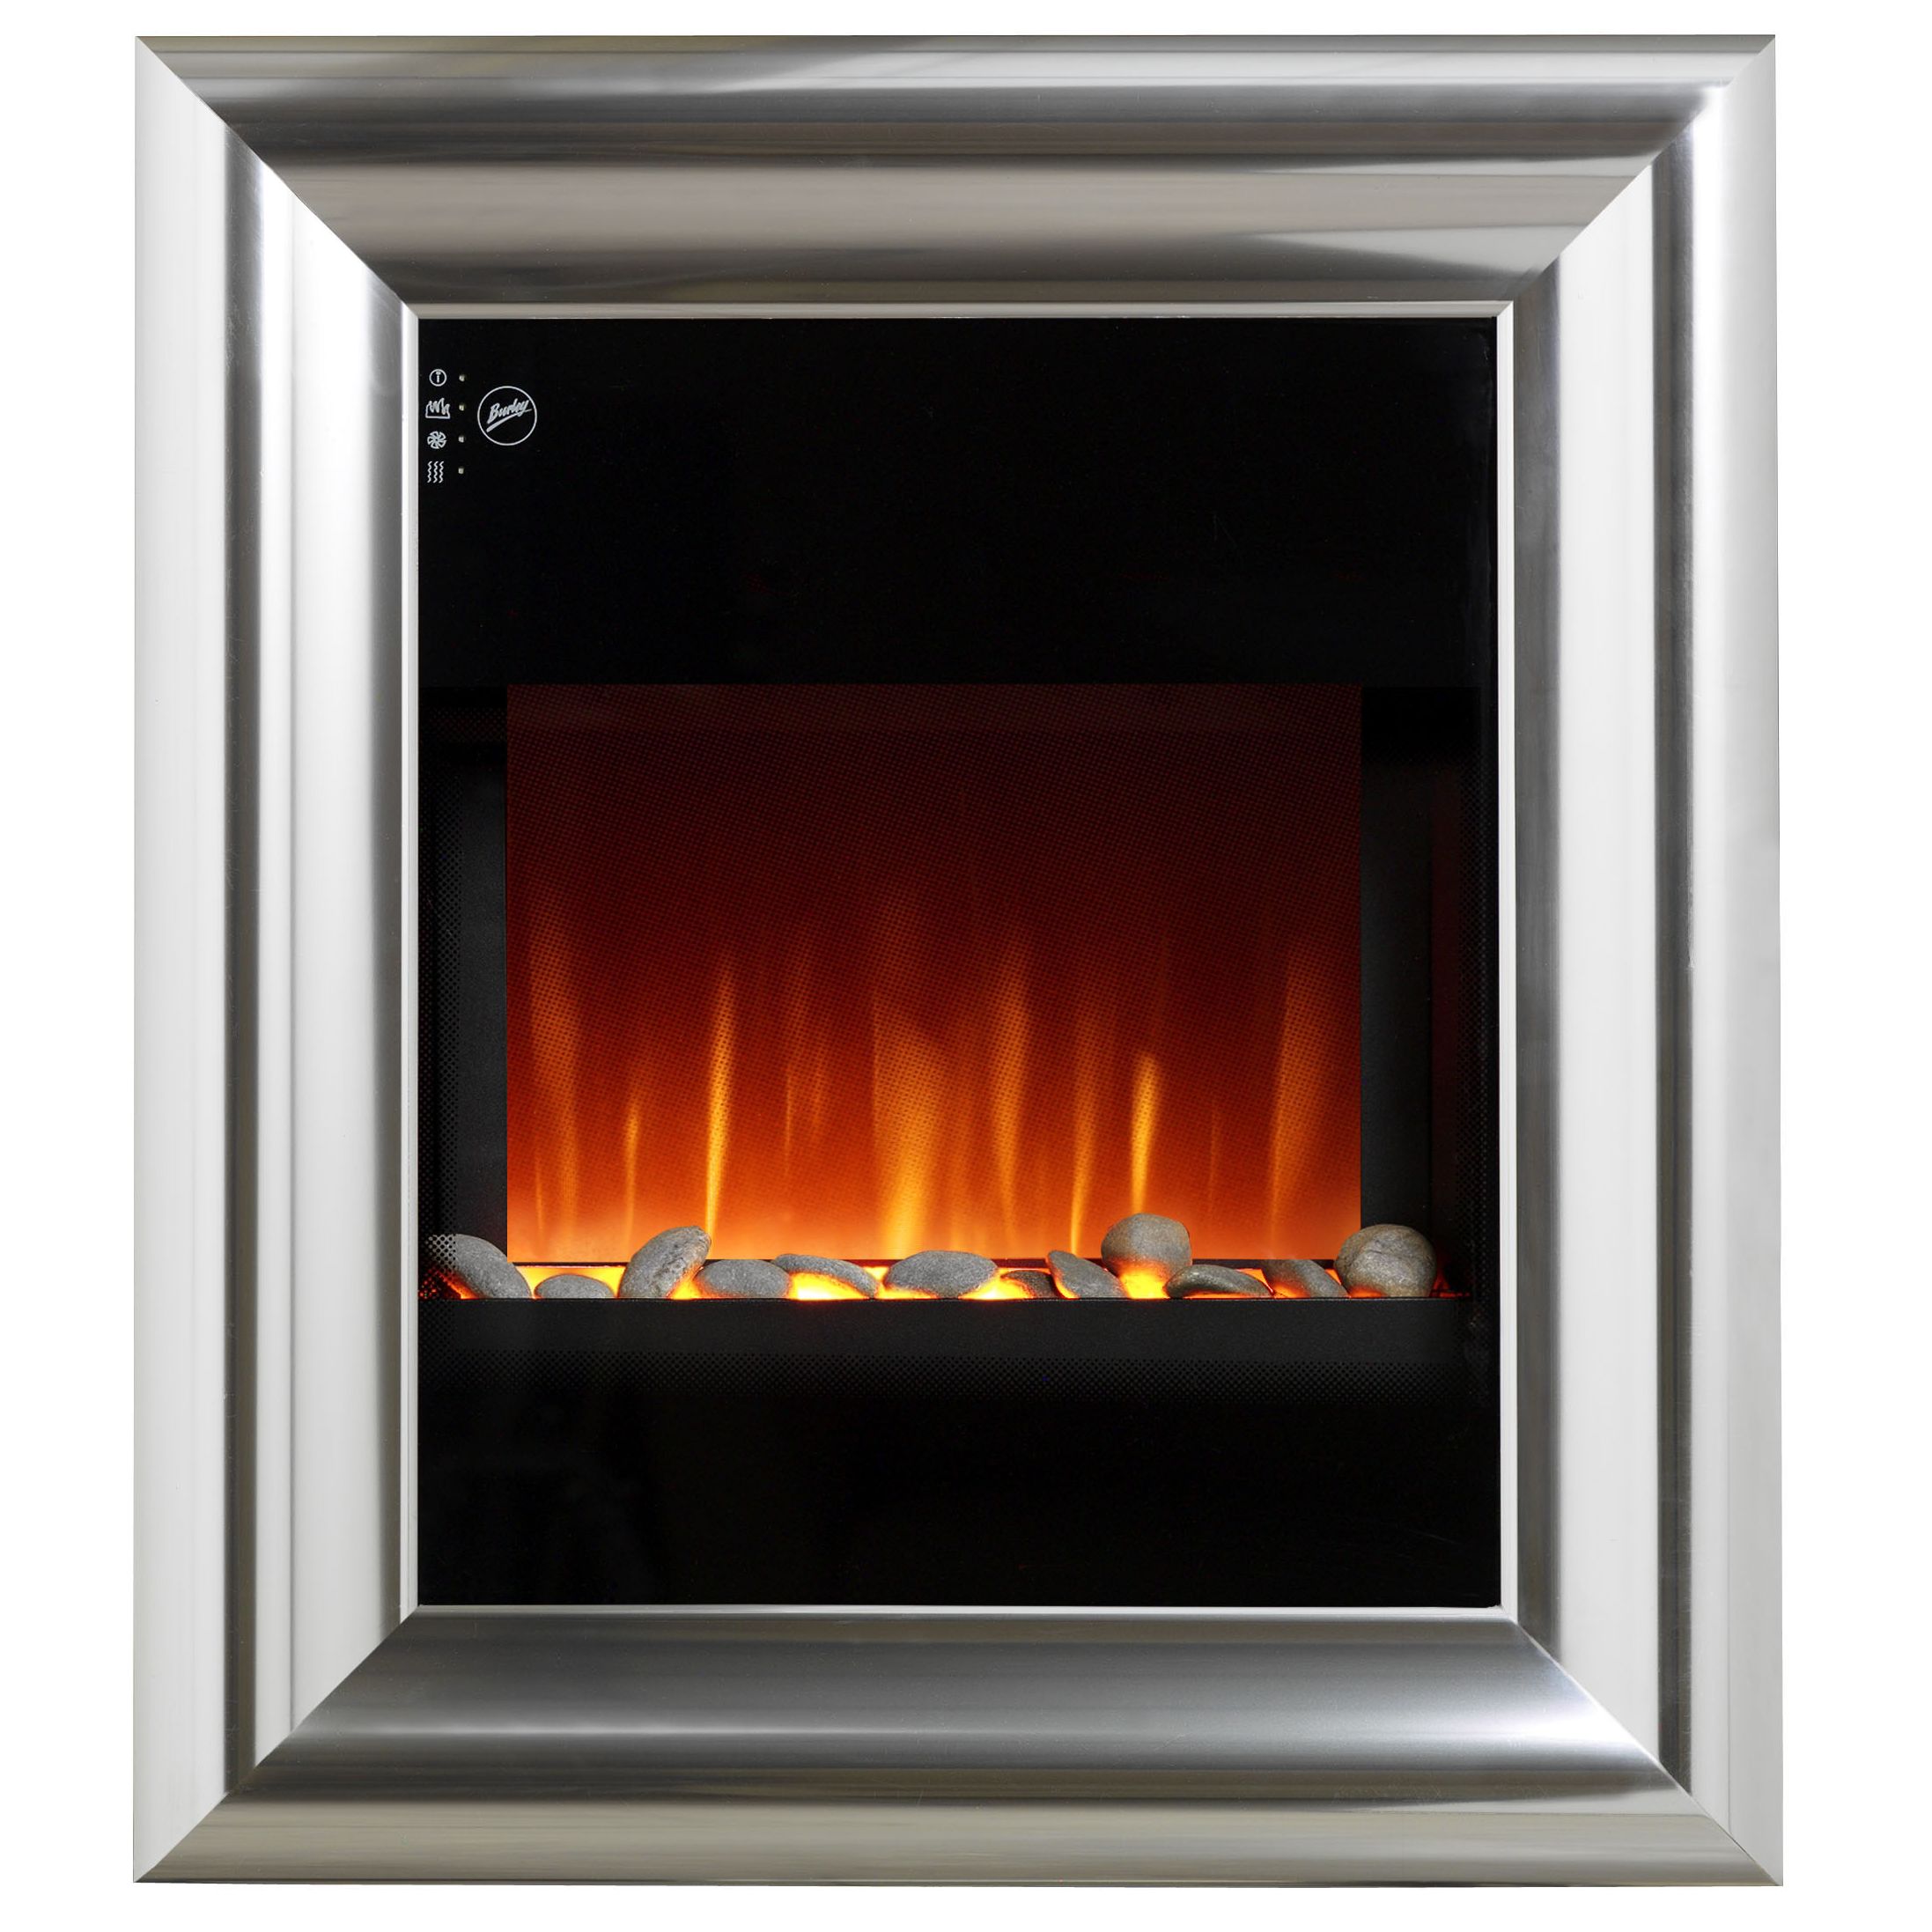 Burley Fuel-Effect Electric Fire, Greetham 556-S, Chrome at John Lewis